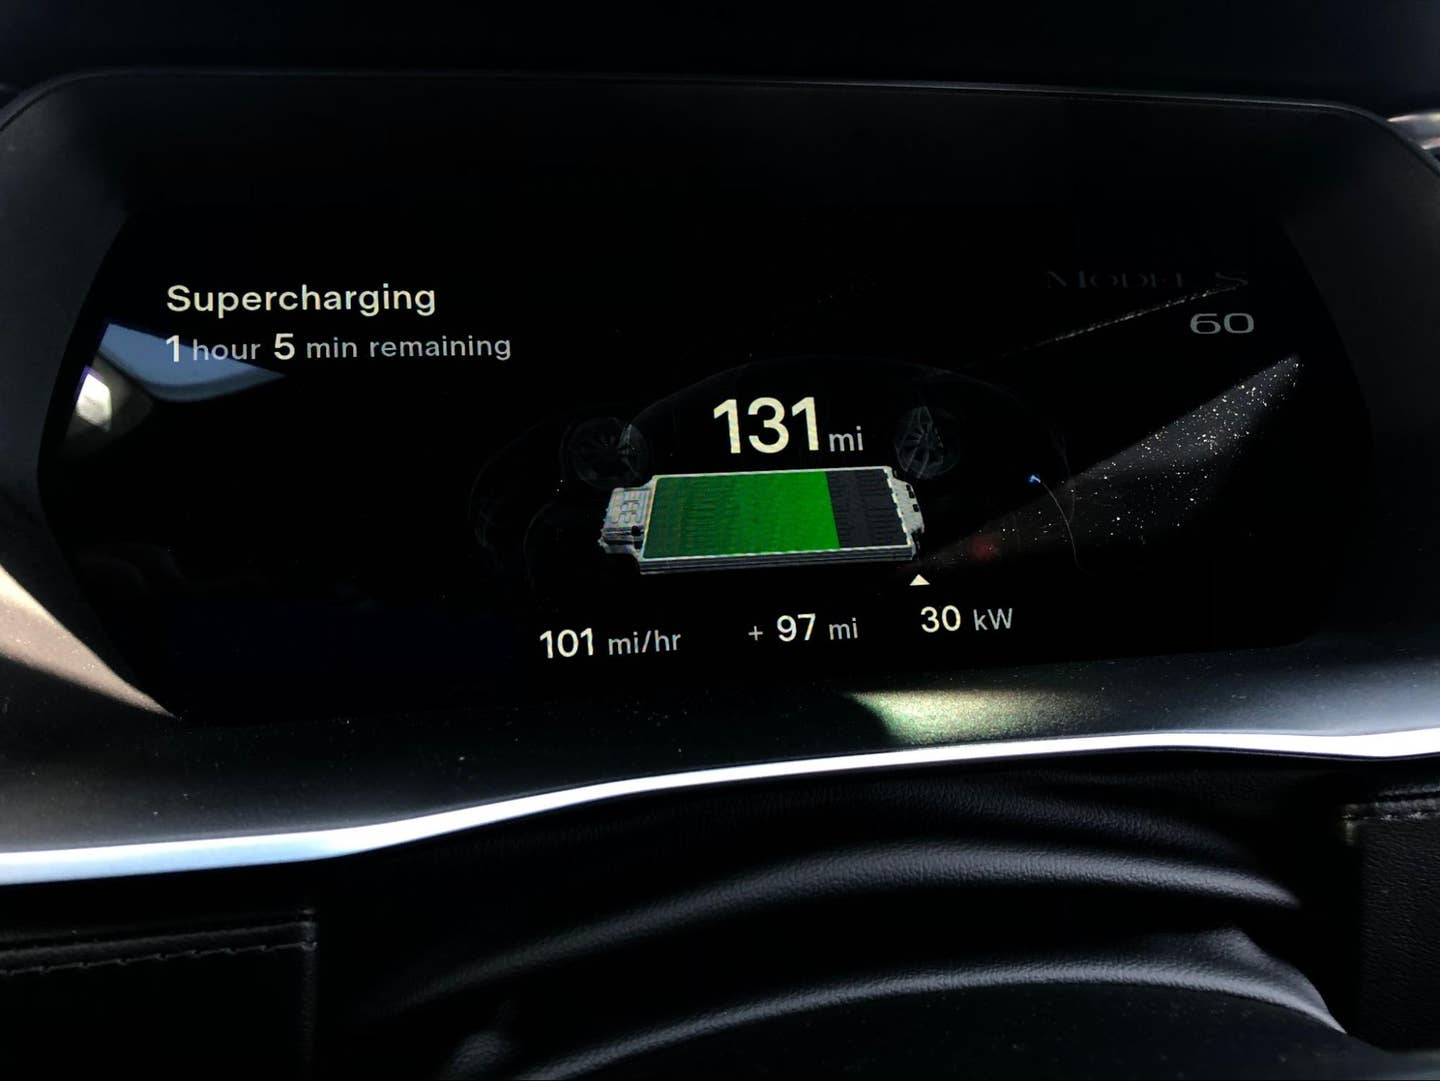 After 40 minutes on the Supercharger already, the Model S estimated another hour just to add 45 miles. <em>Joe Ligo</em>